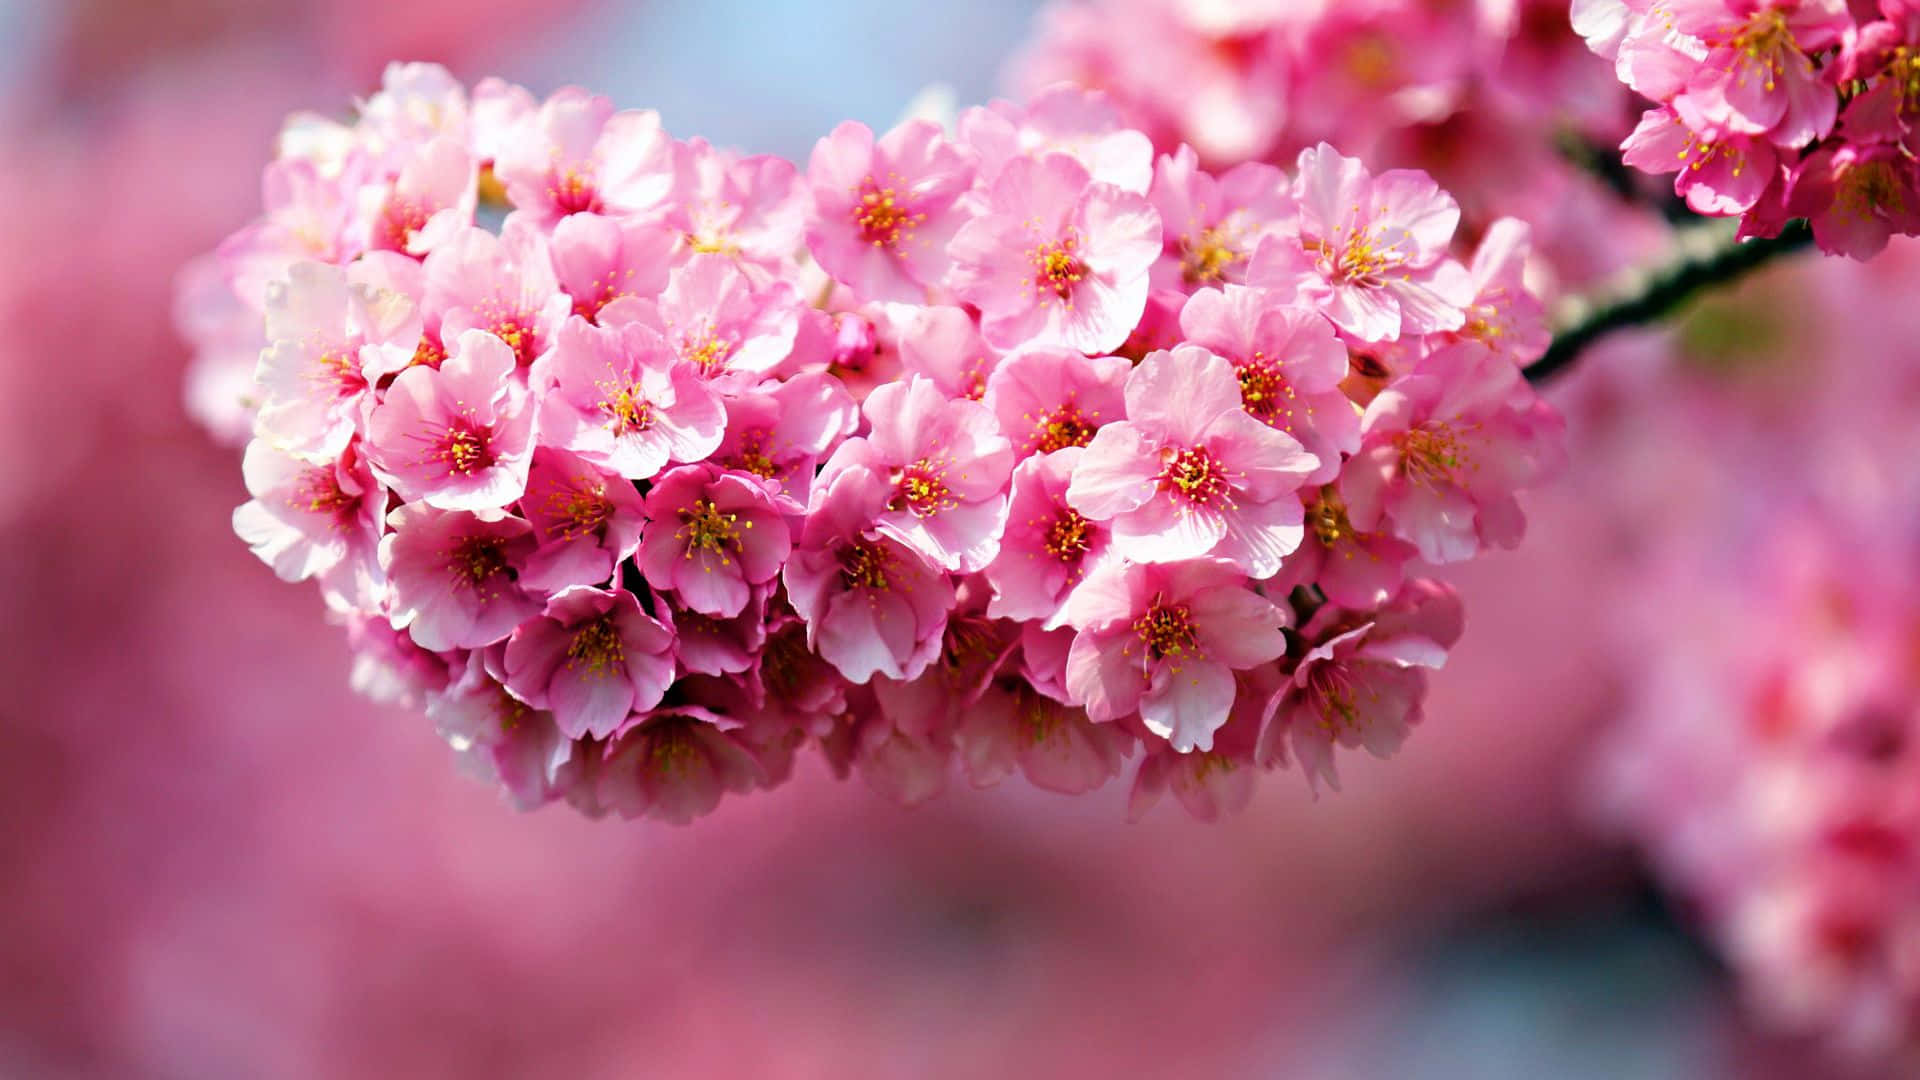 A Pink Flower Is On A Branch With Blurred Background